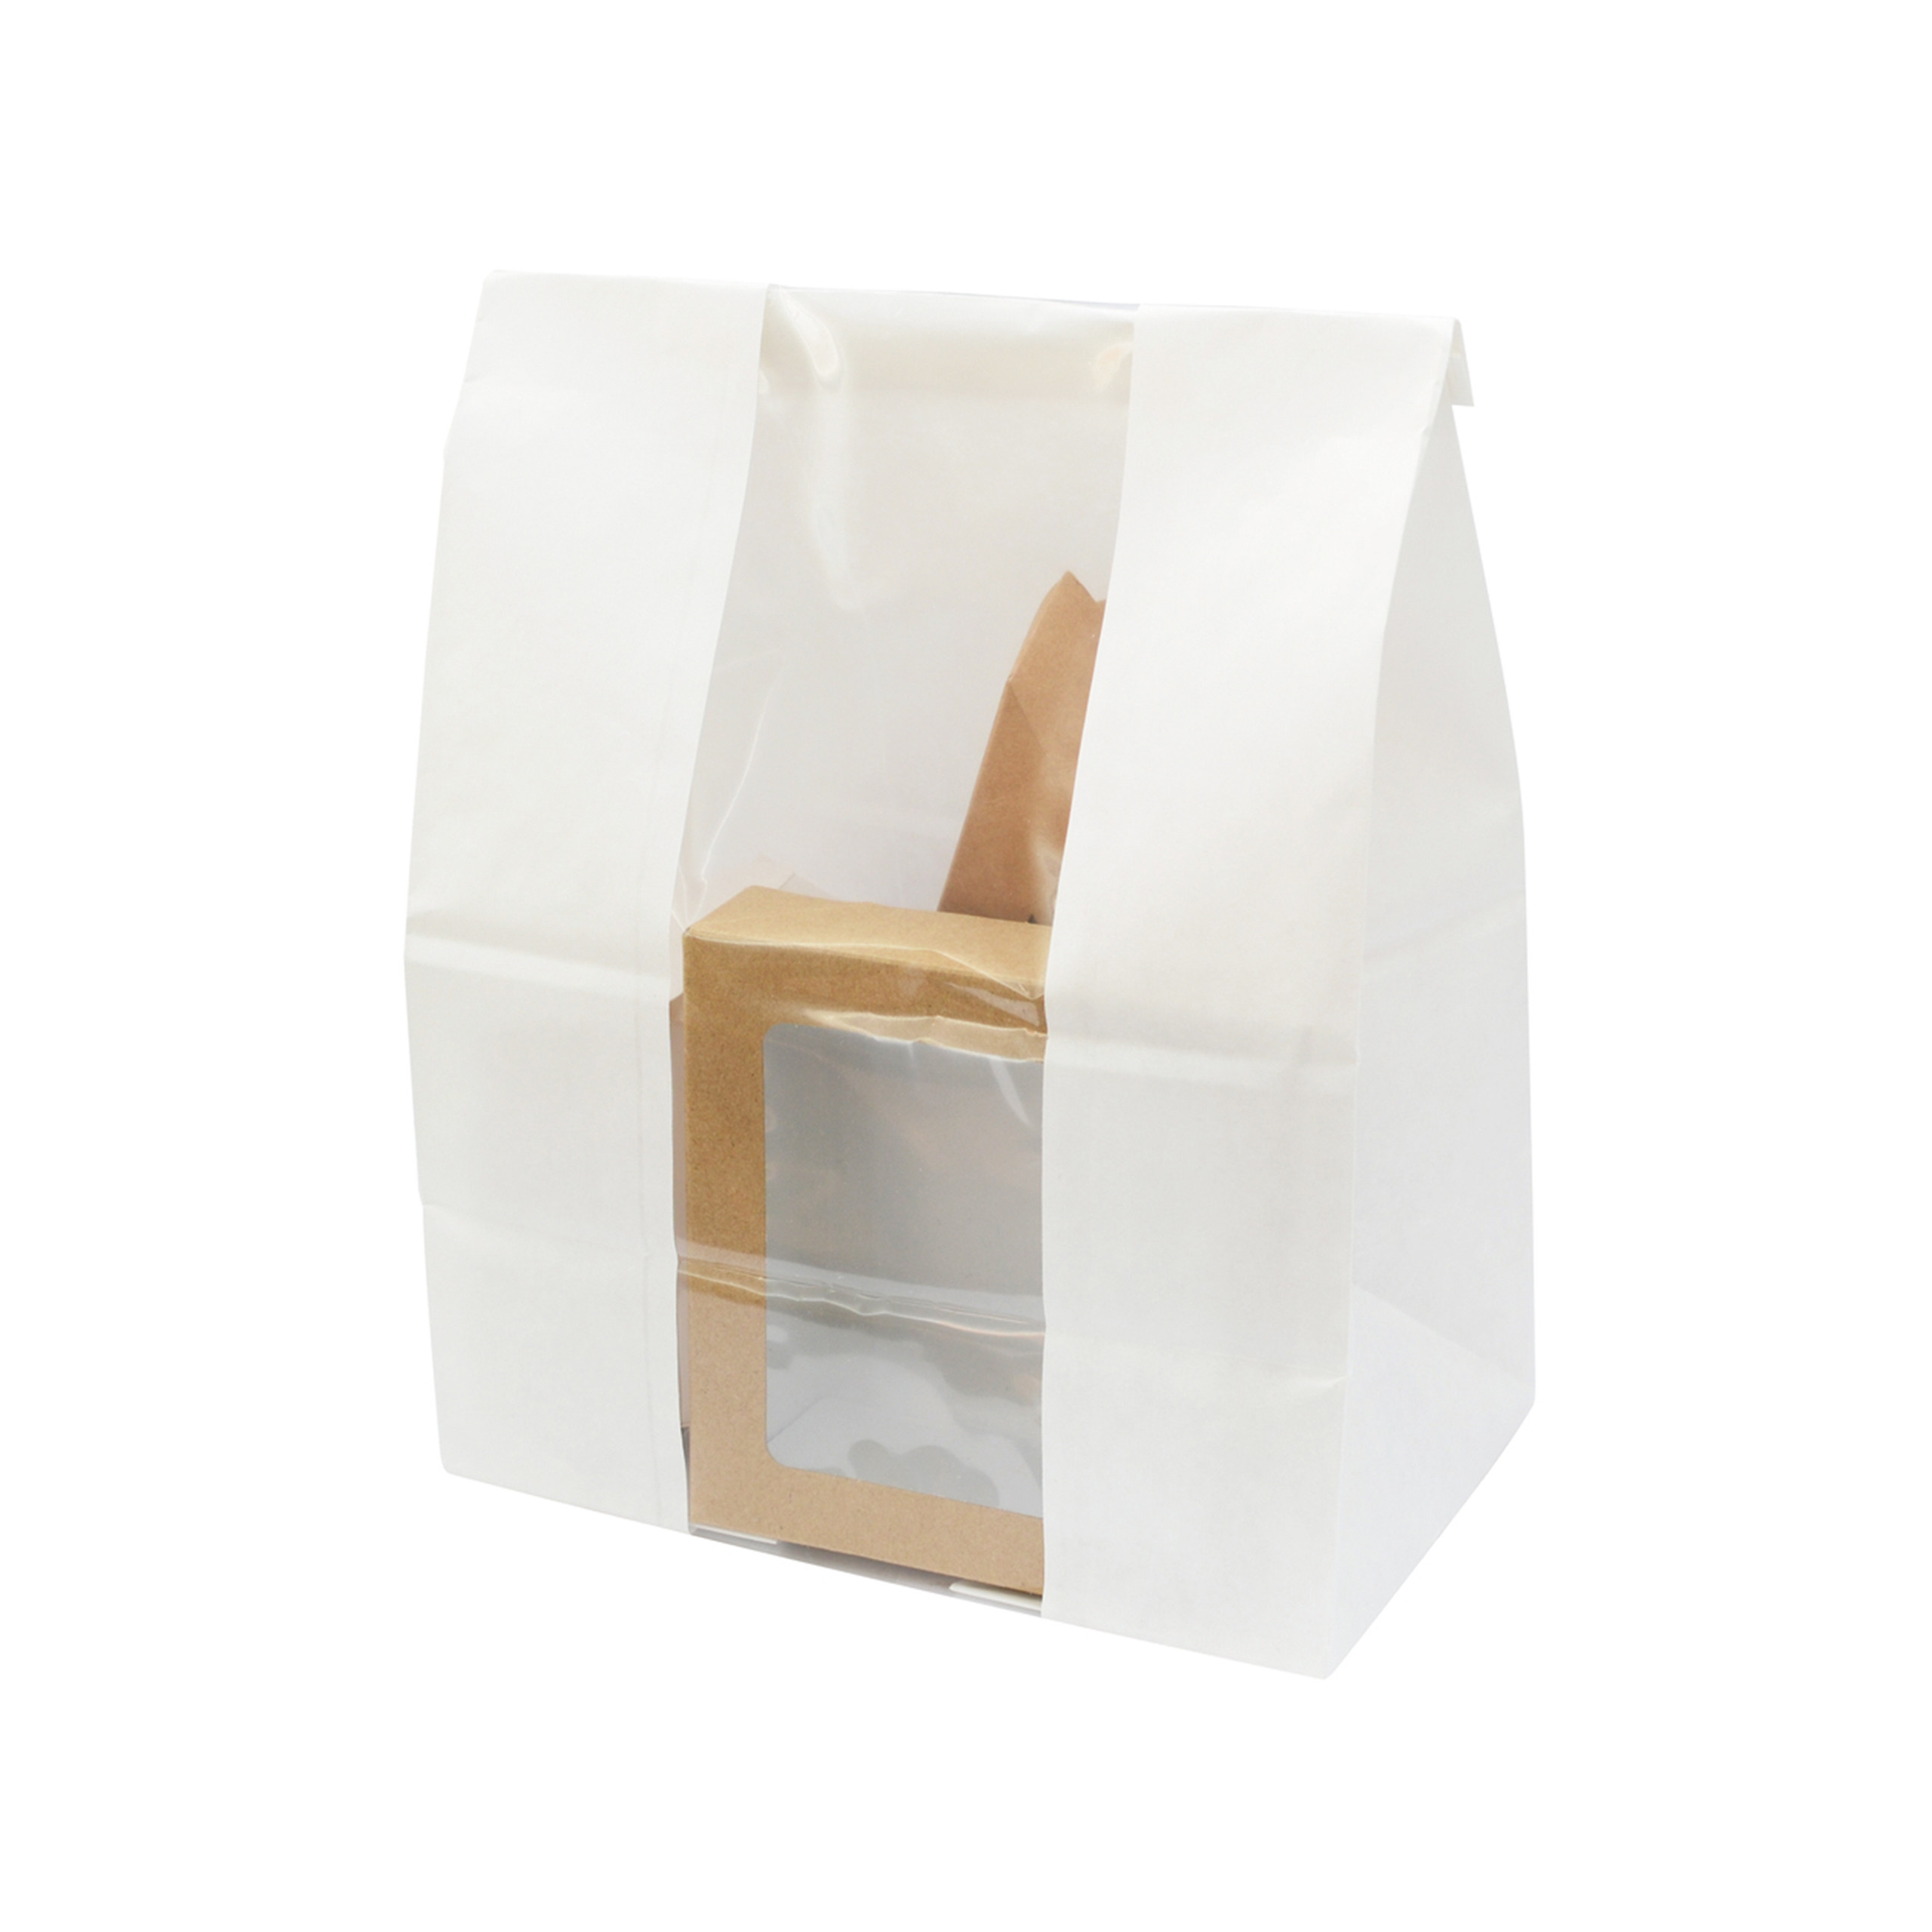 Long White Sos Bag With Window - L:7.1 x W:4.3 x H:10.25in - Packnwood